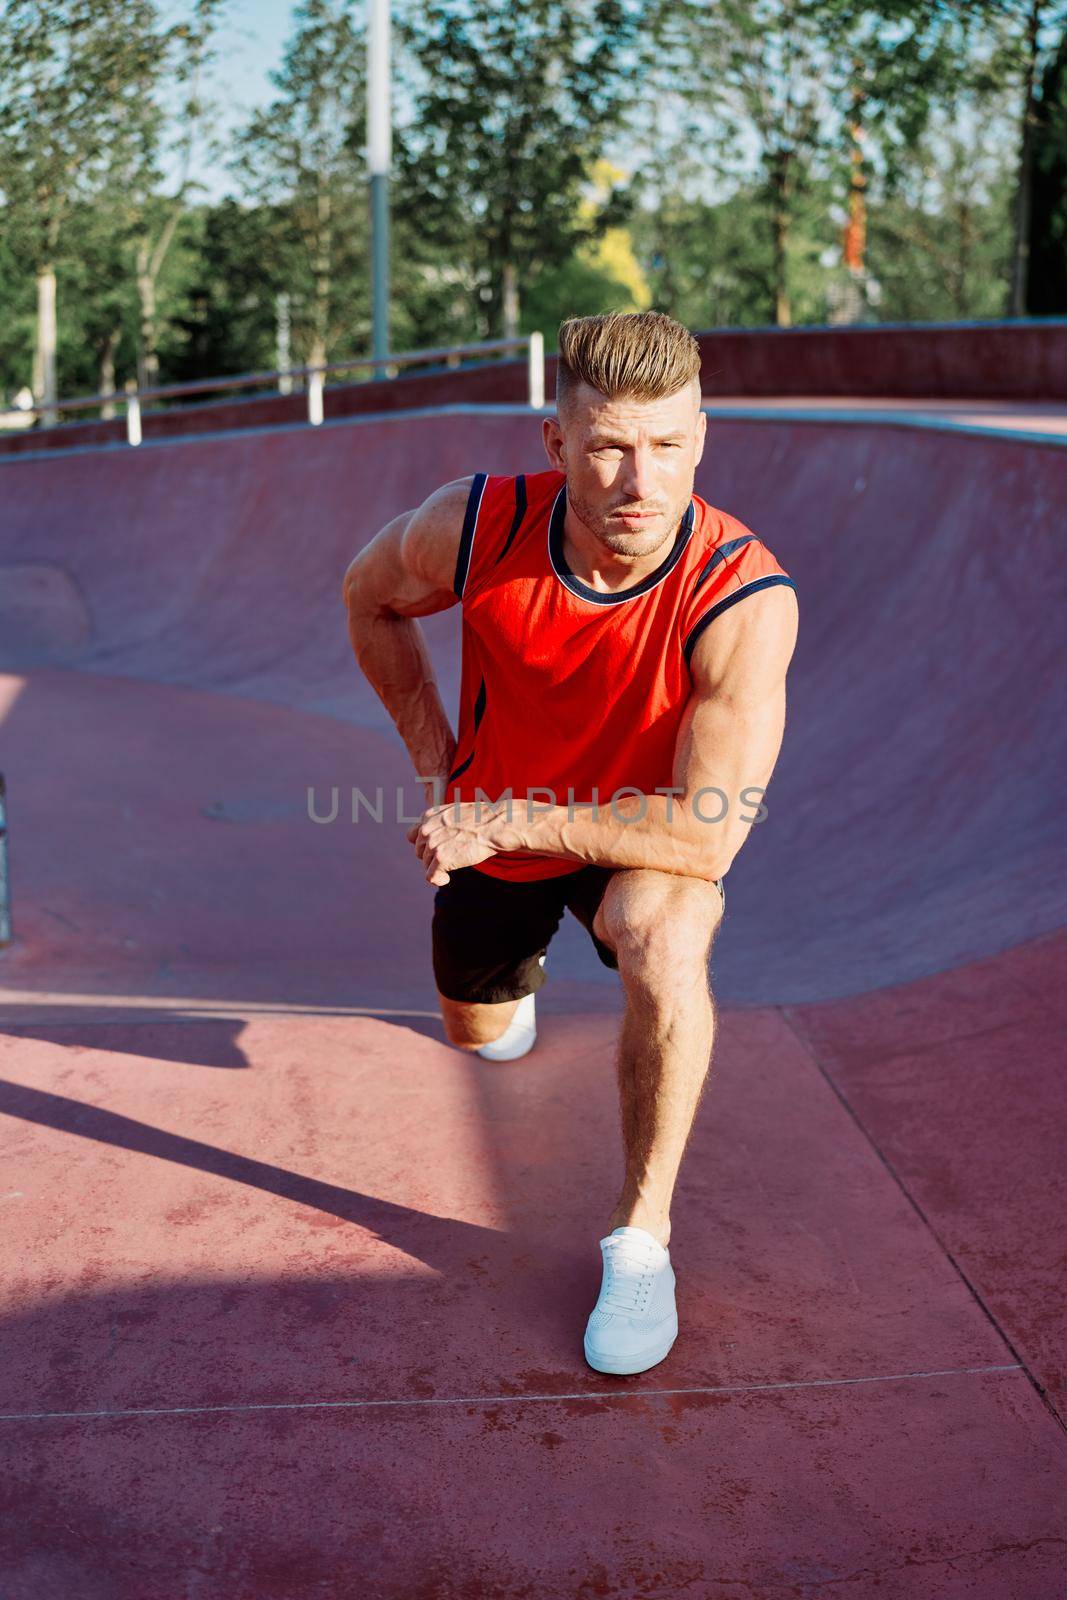 athletic man workout exercise fitness sportfit fresh air. High quality photo